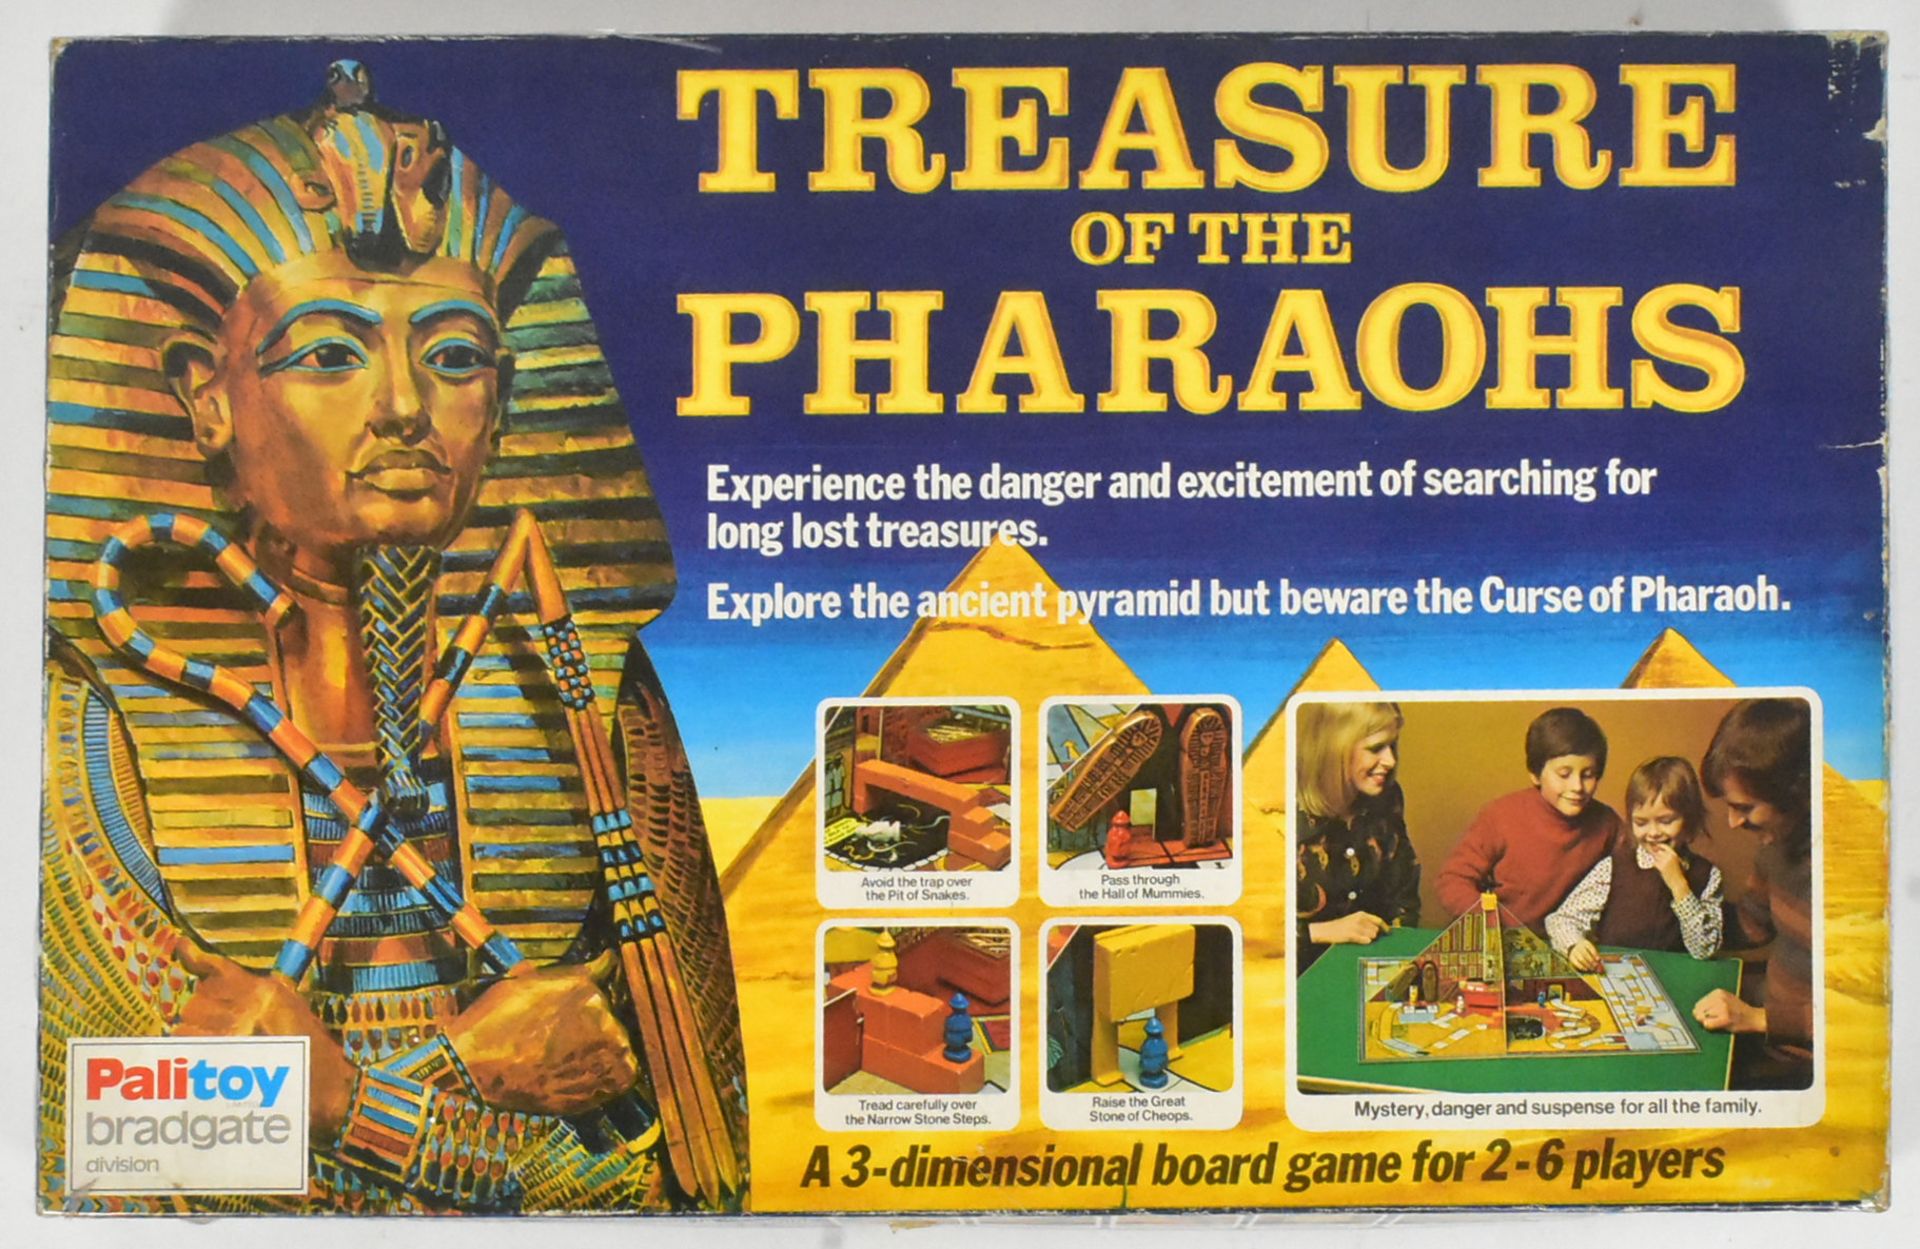 BOARD GAMES - PALITOY TREASURE OF THE PHARAOHS - Image 6 of 6